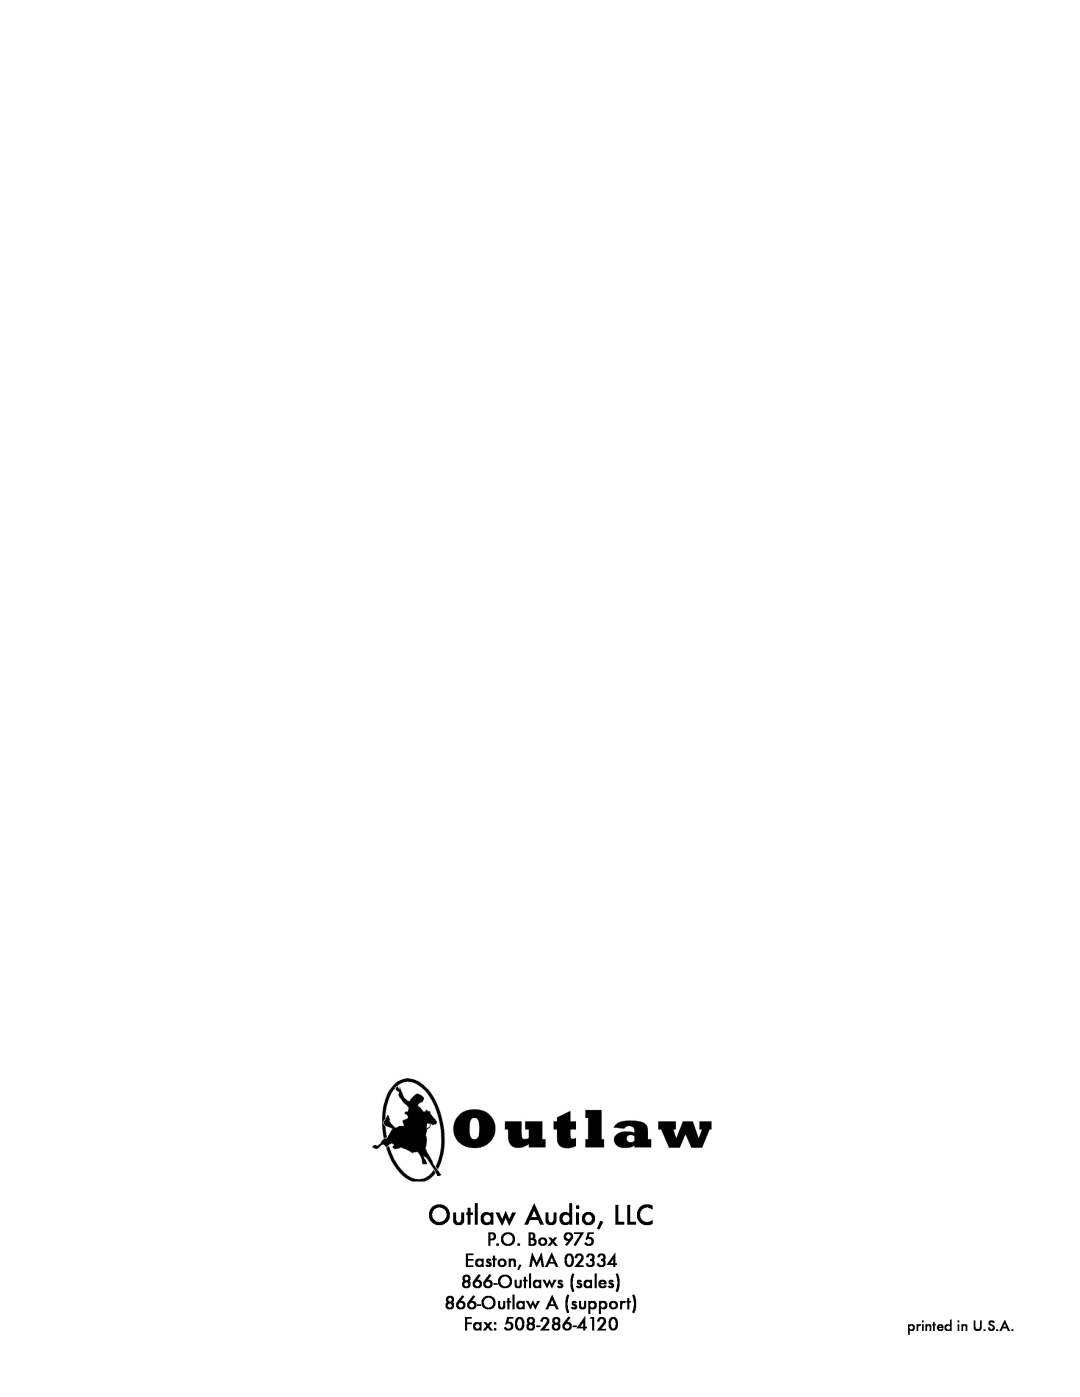 Outlaw Audio 7100 owner manual Outlaw Audio, LLC, P.O. Box Easton, MA 02334 866-Outlawssales, OutlawA support Fax 